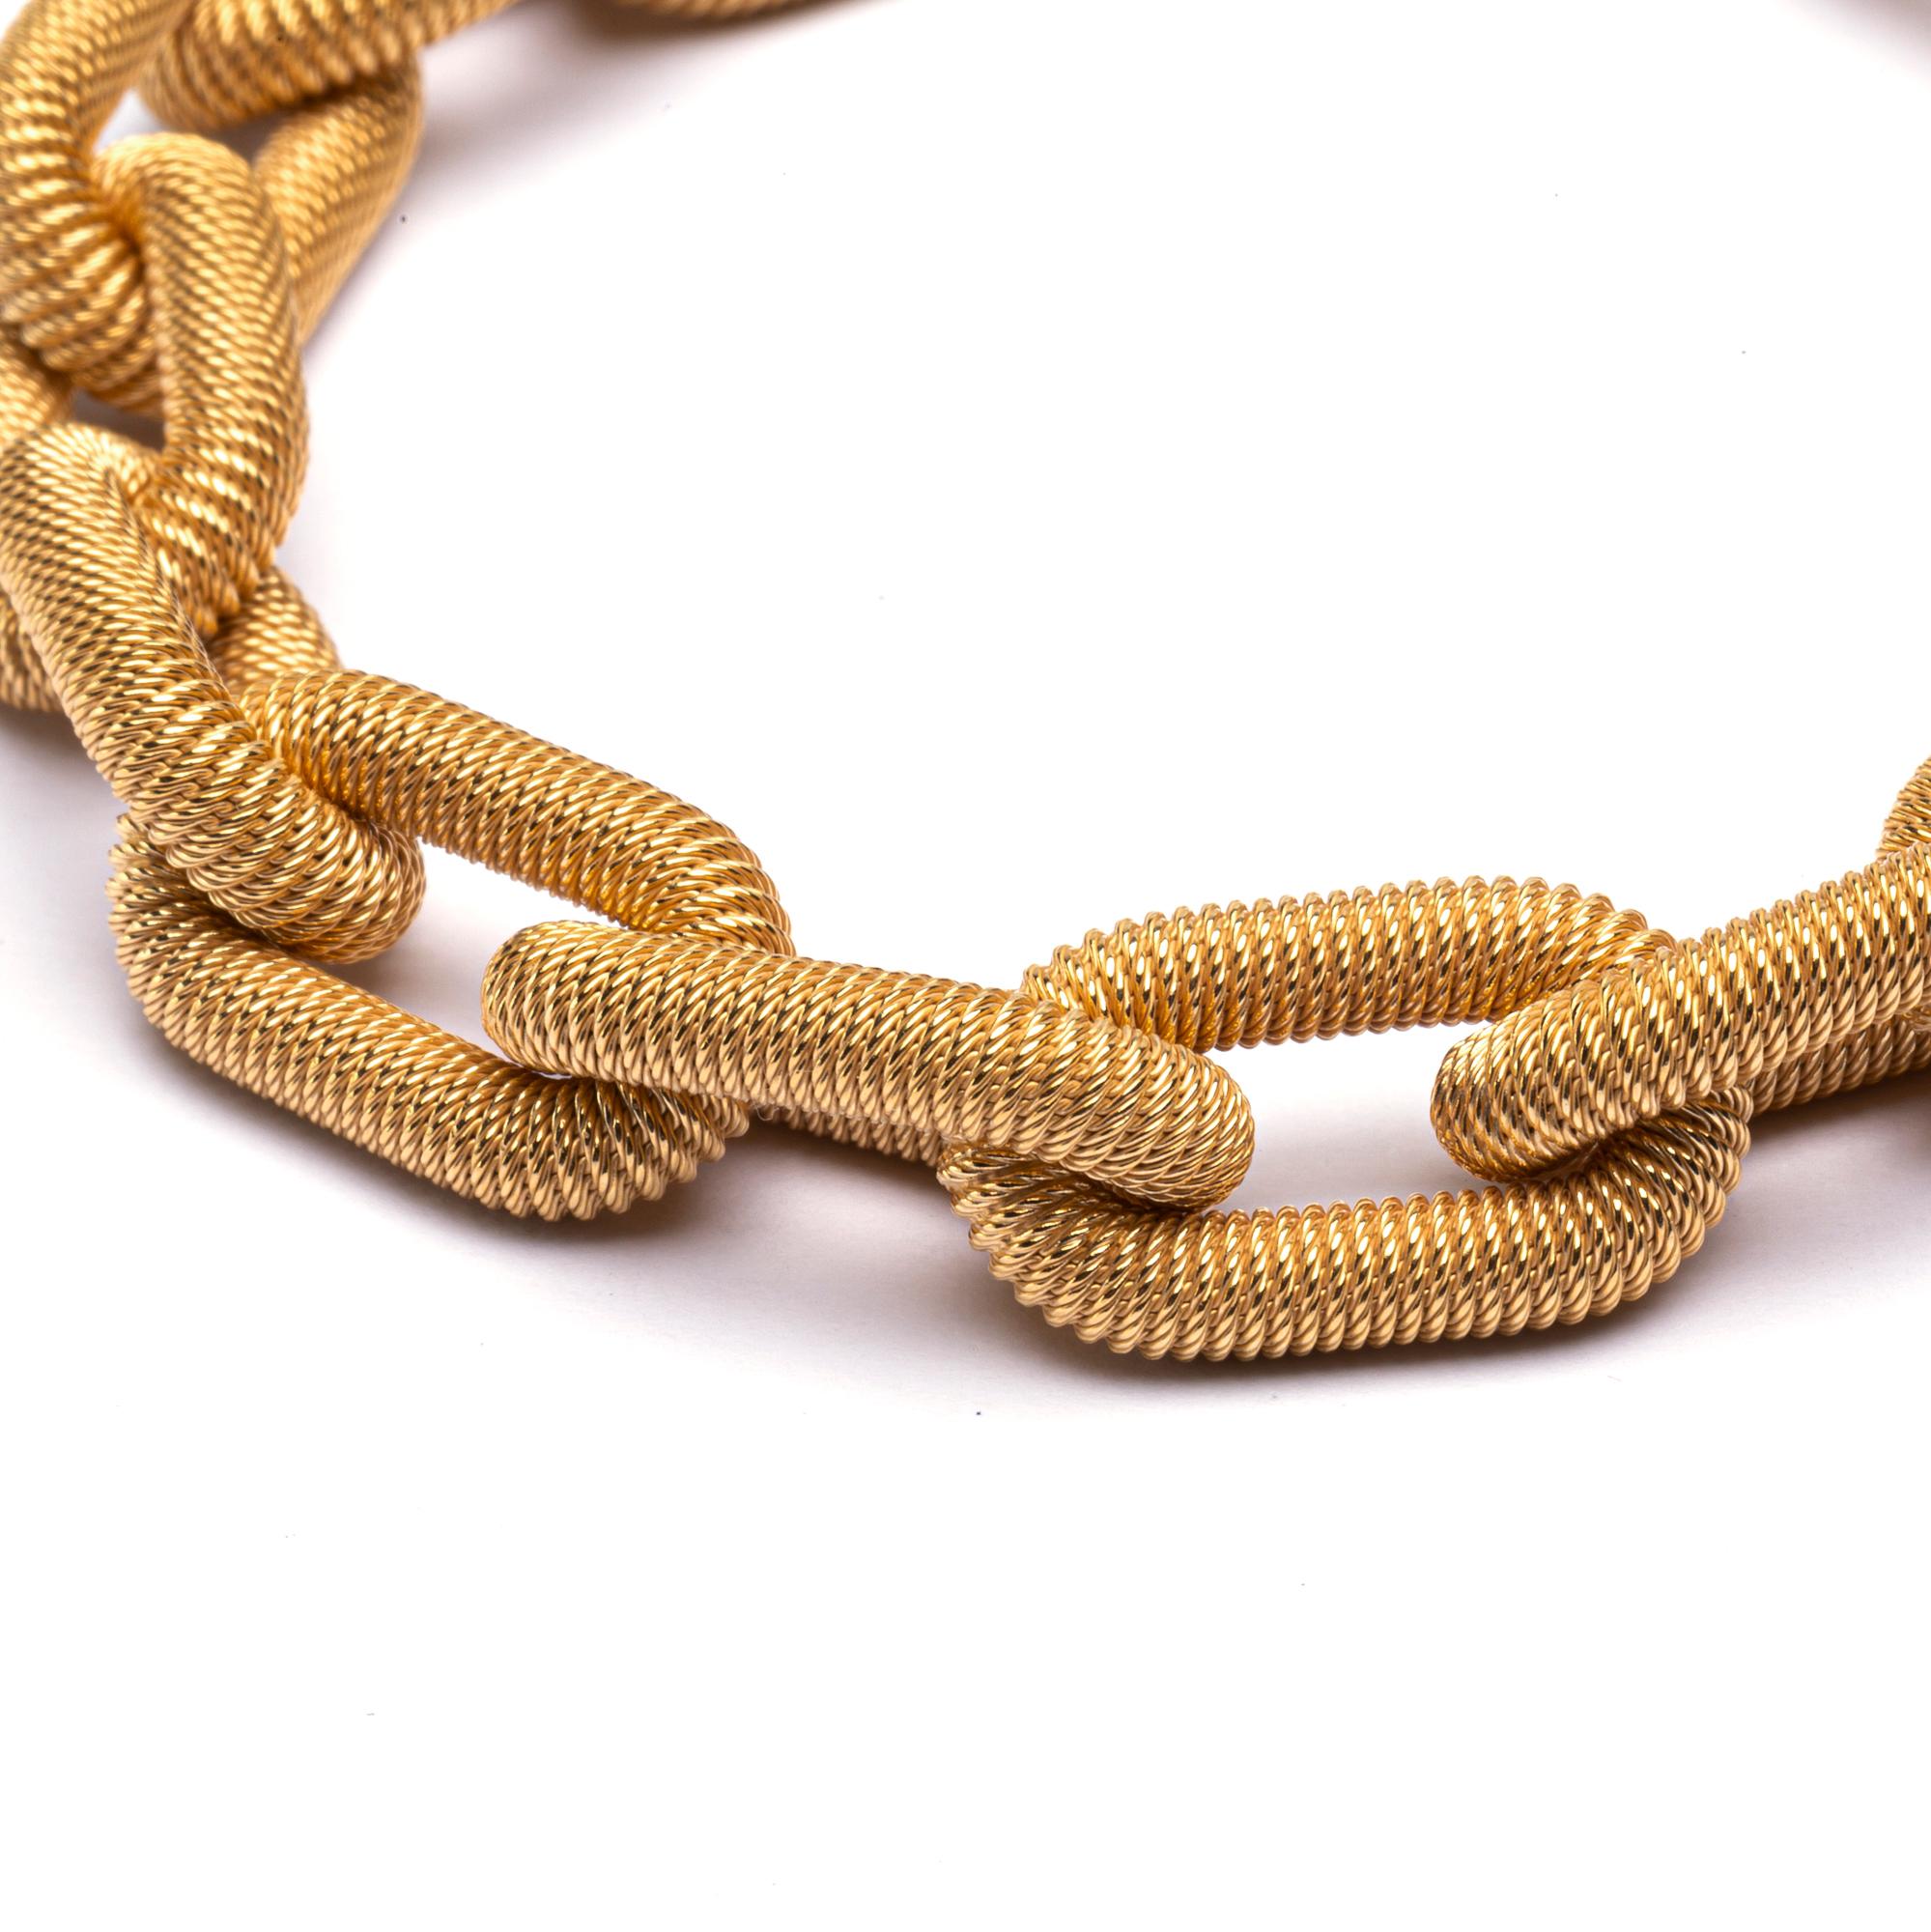 Alex Jona design collection, hand crafted in Italy, gold plated twisted wire sterling silver elongated link  chain bracelet. Marked Alex Jona.
Alex Jona jewels stand out, not only for their special design and for the excellent quality of the